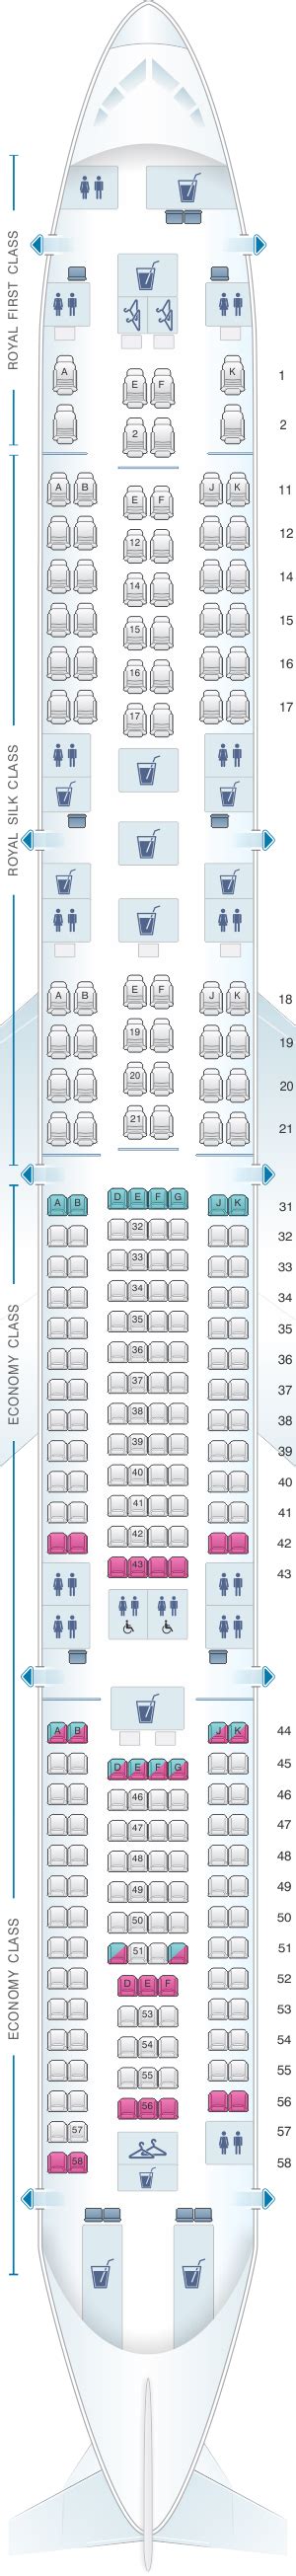 Download Airbus A340 600 Seat Map  Airbus Way